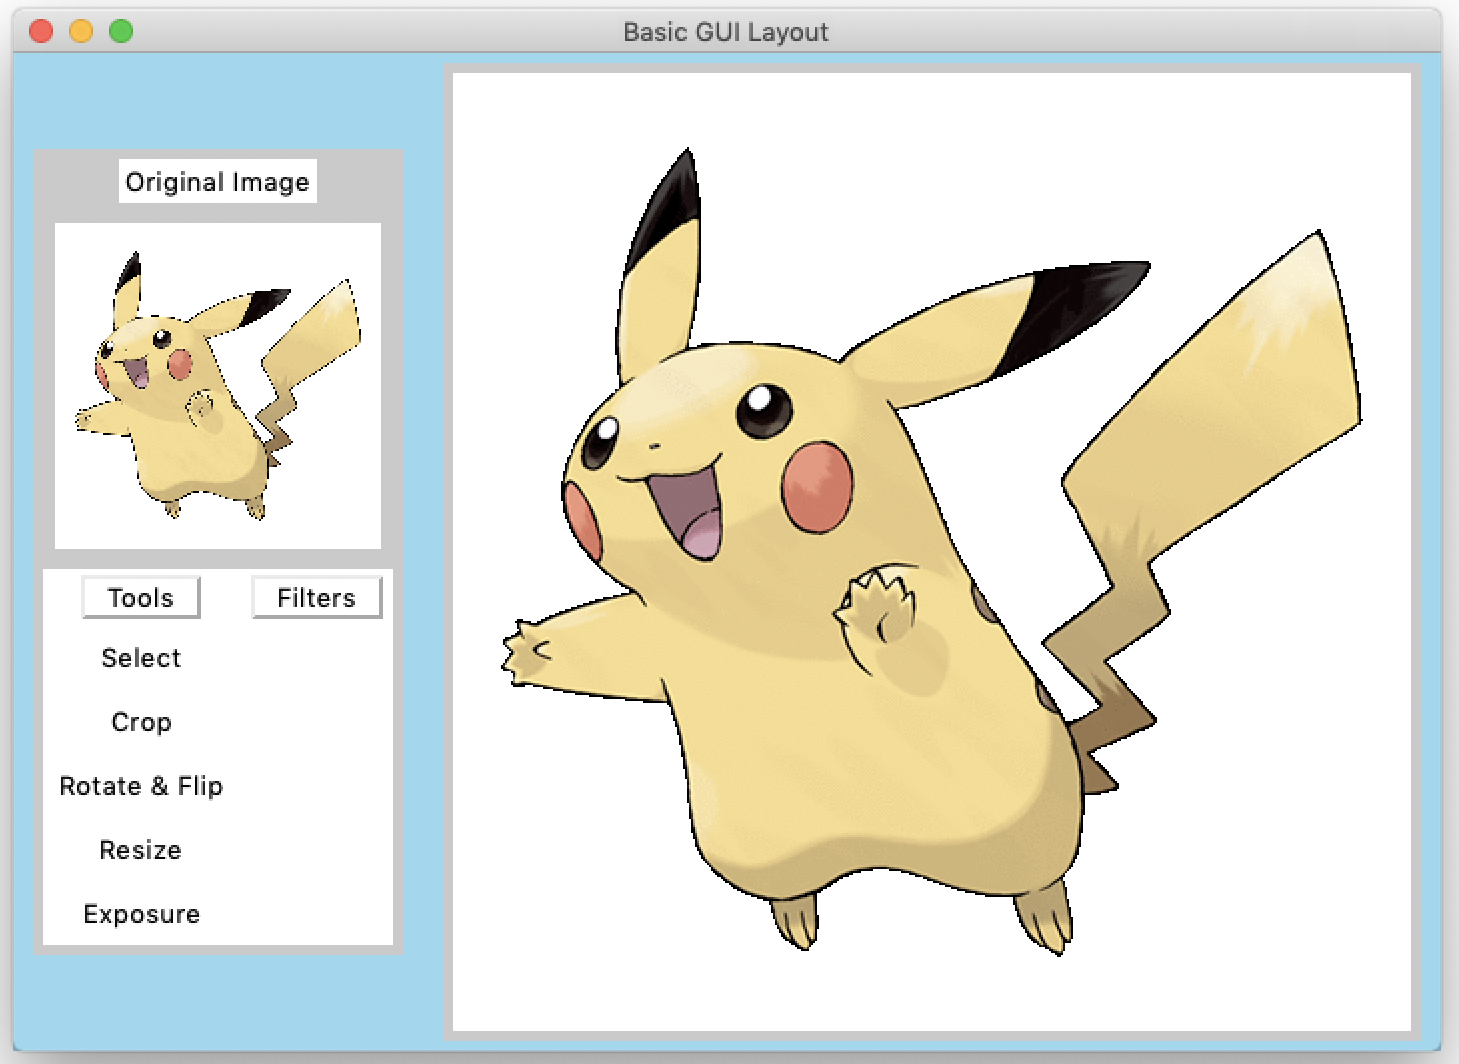 Example of GUI with Pikachu image.